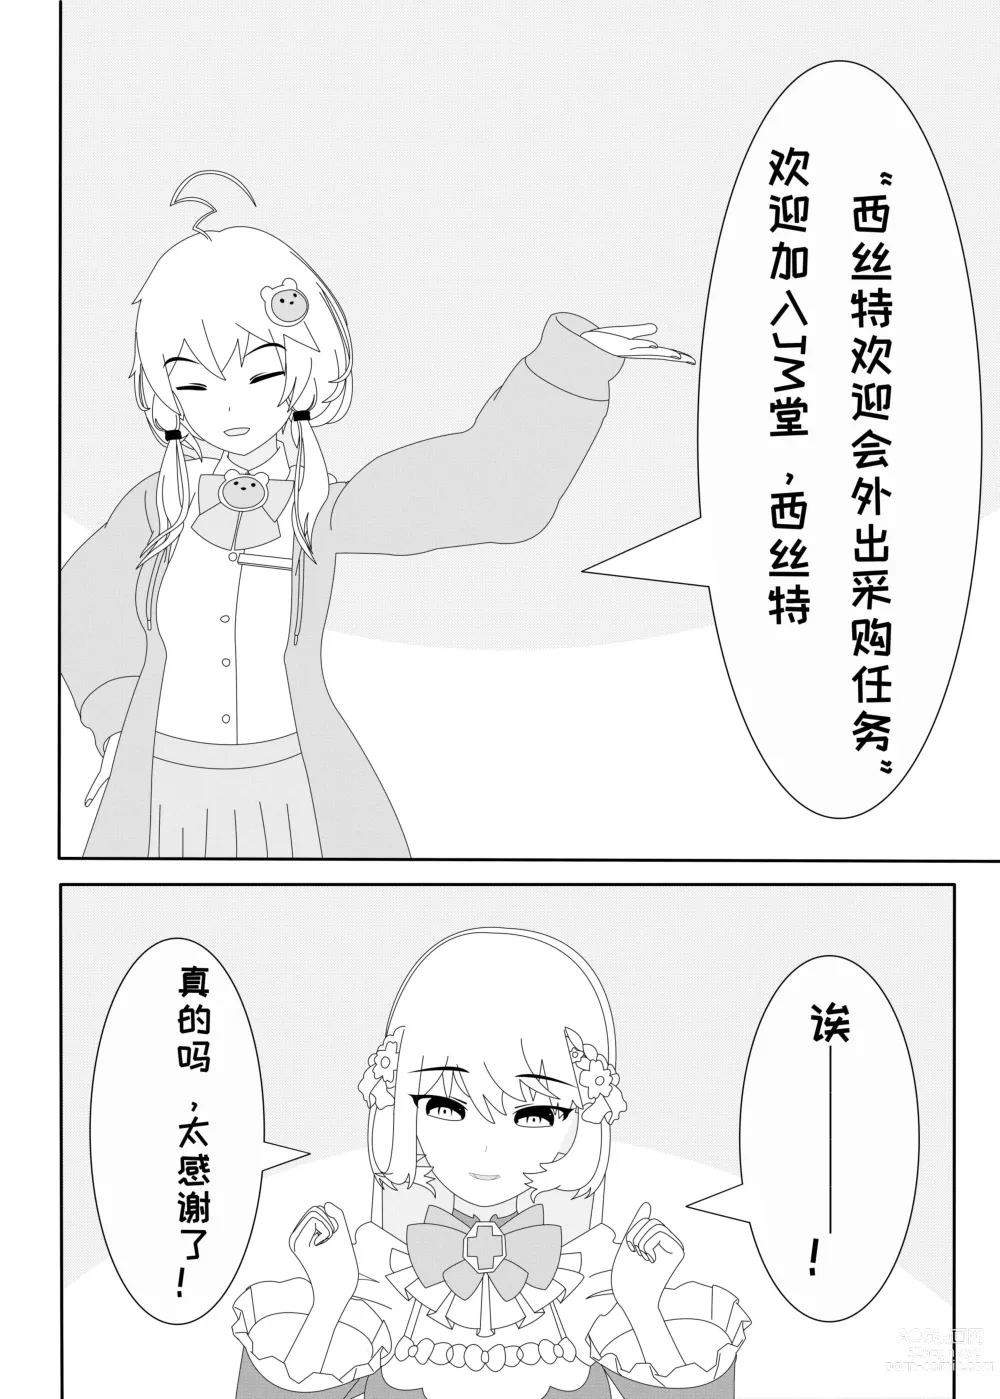 Page 7 of doujinshi 鲸之恋2（西丝特Xether）